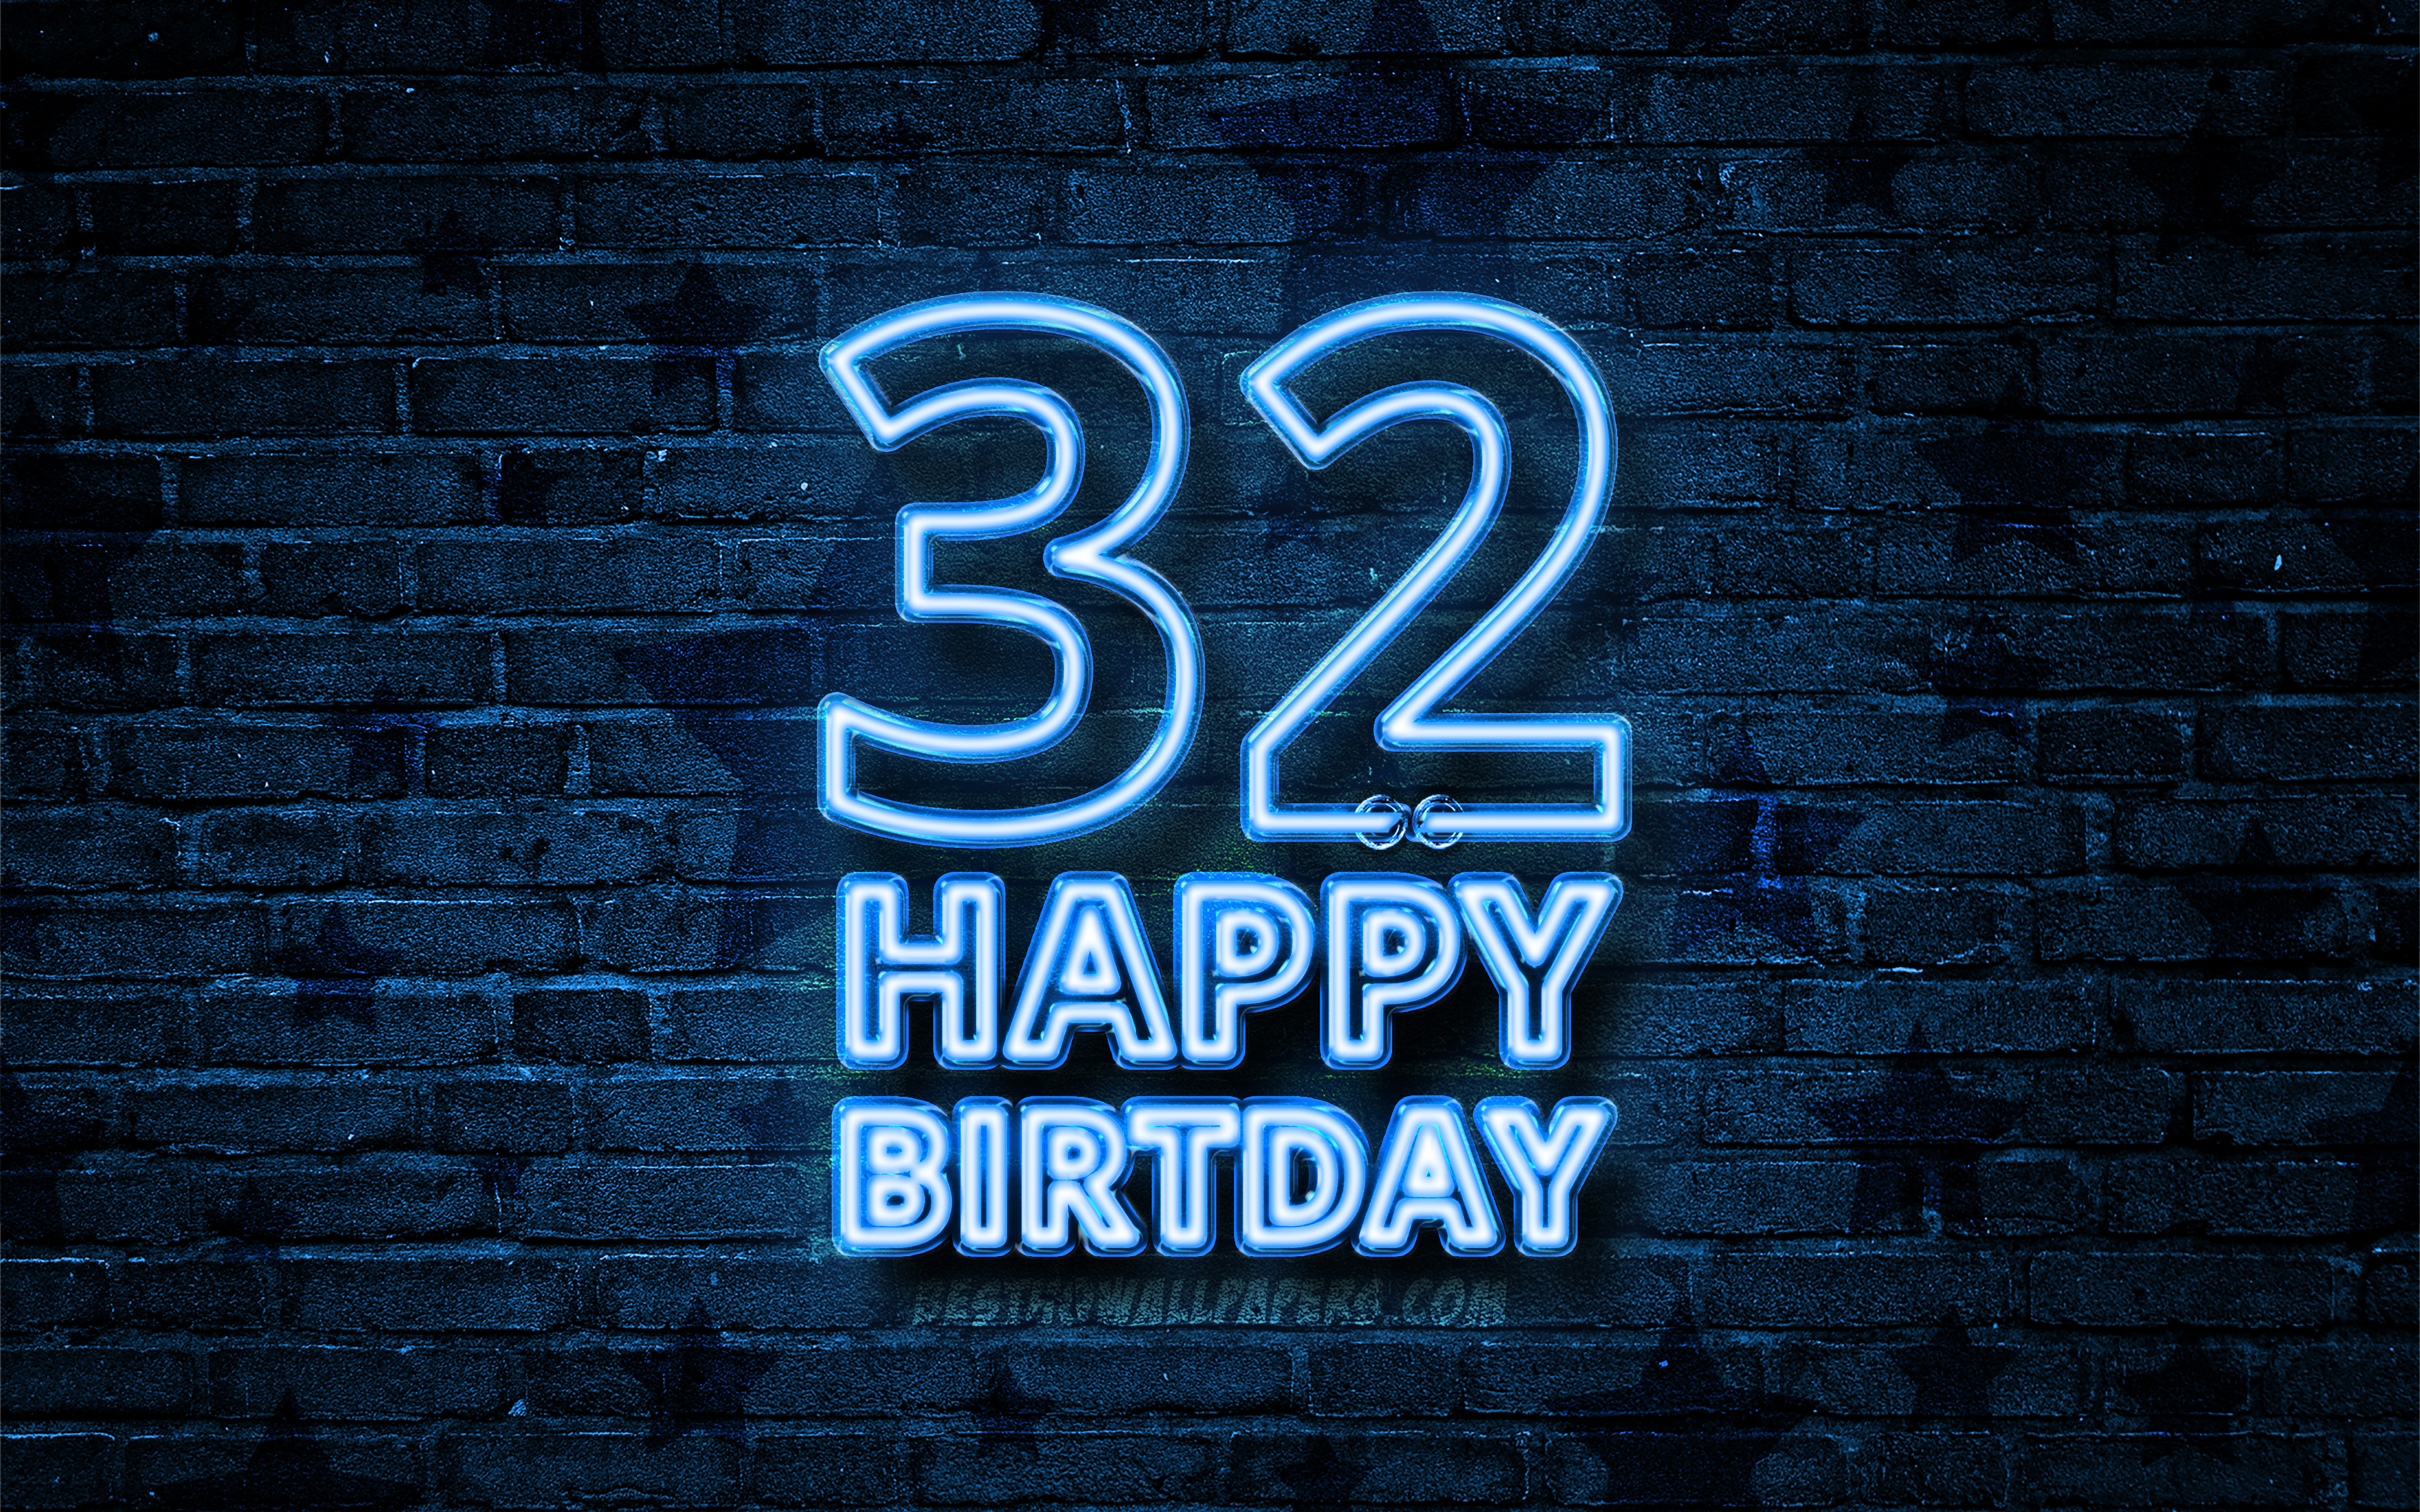 Download wallpaper Happy 32 Years Birthday, 4k, blue neon text, 32nd Birthday Party, blue brickwall, Happy 32nd birthday, Birthday concept, Birthday Party, 32nd Birthday for desktop with resolution 3840x2400. High Quality HD